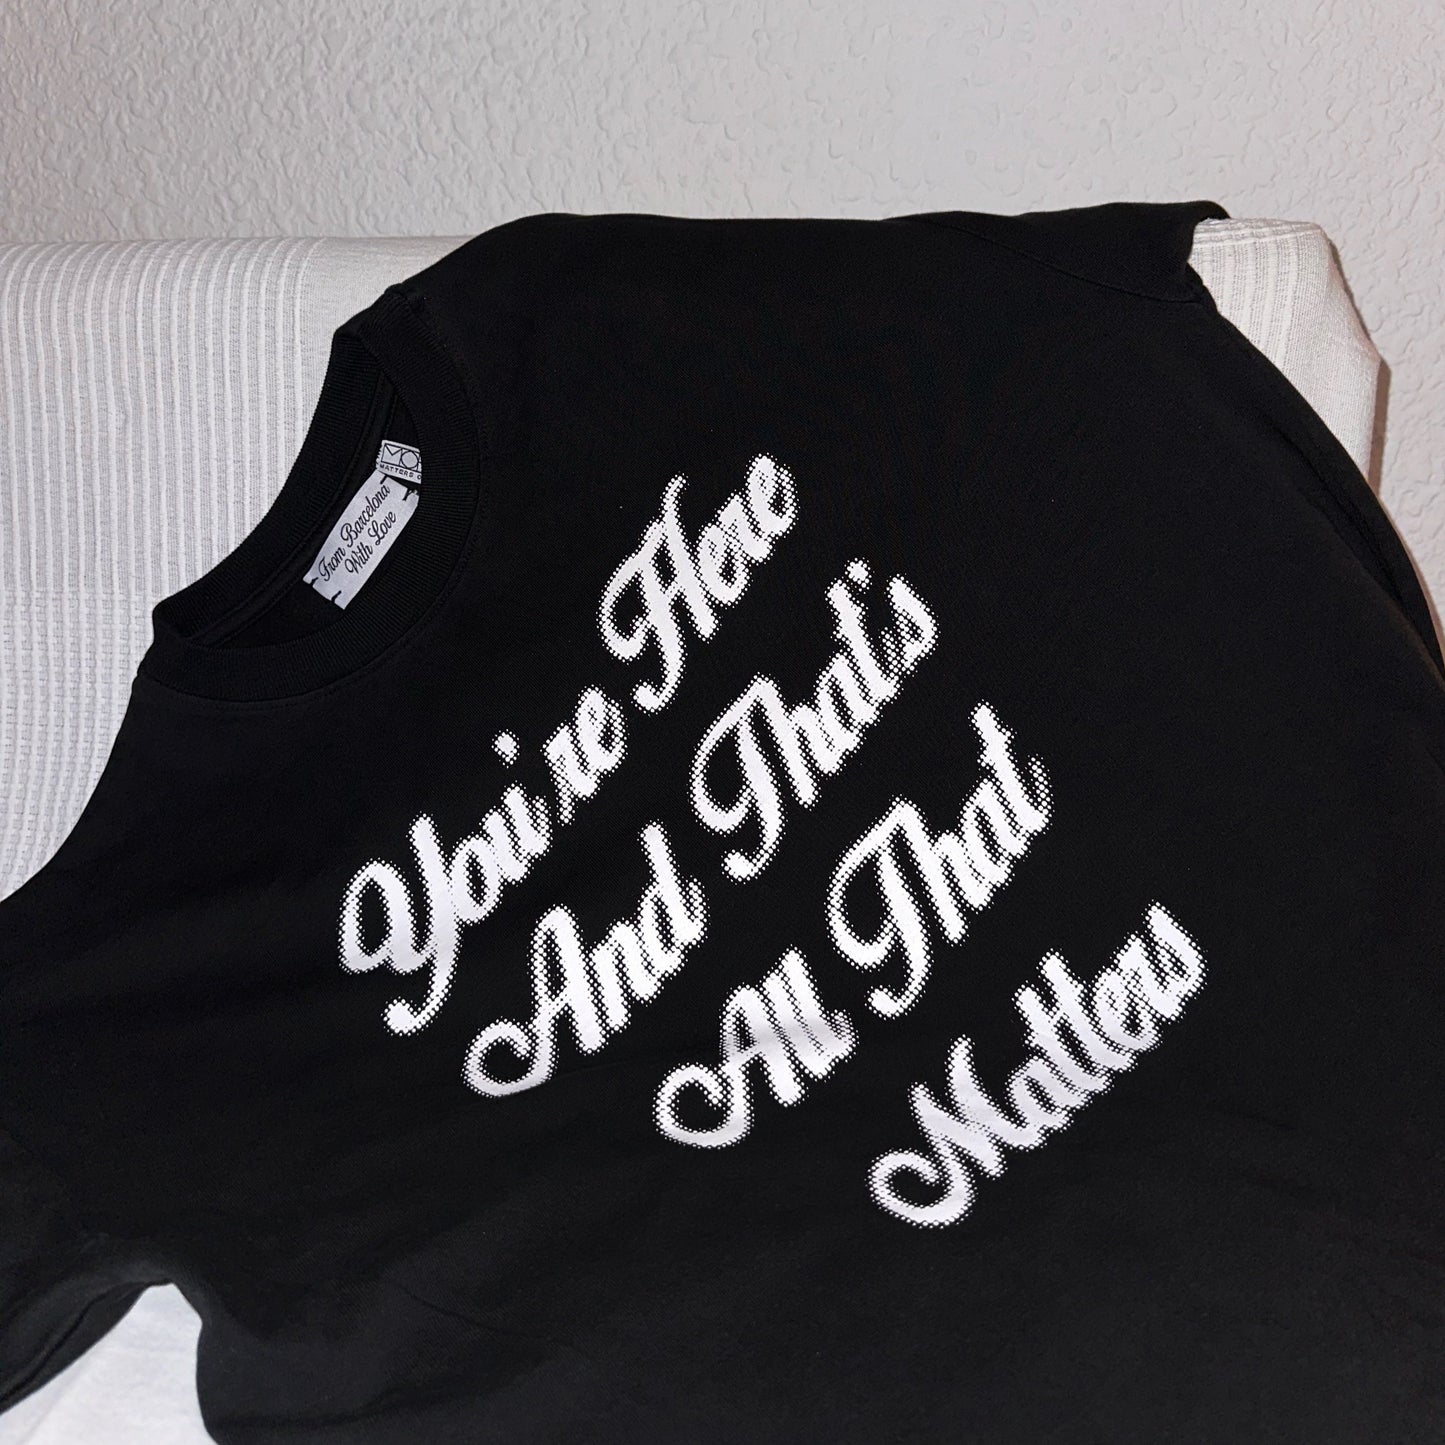 all that matters – tee